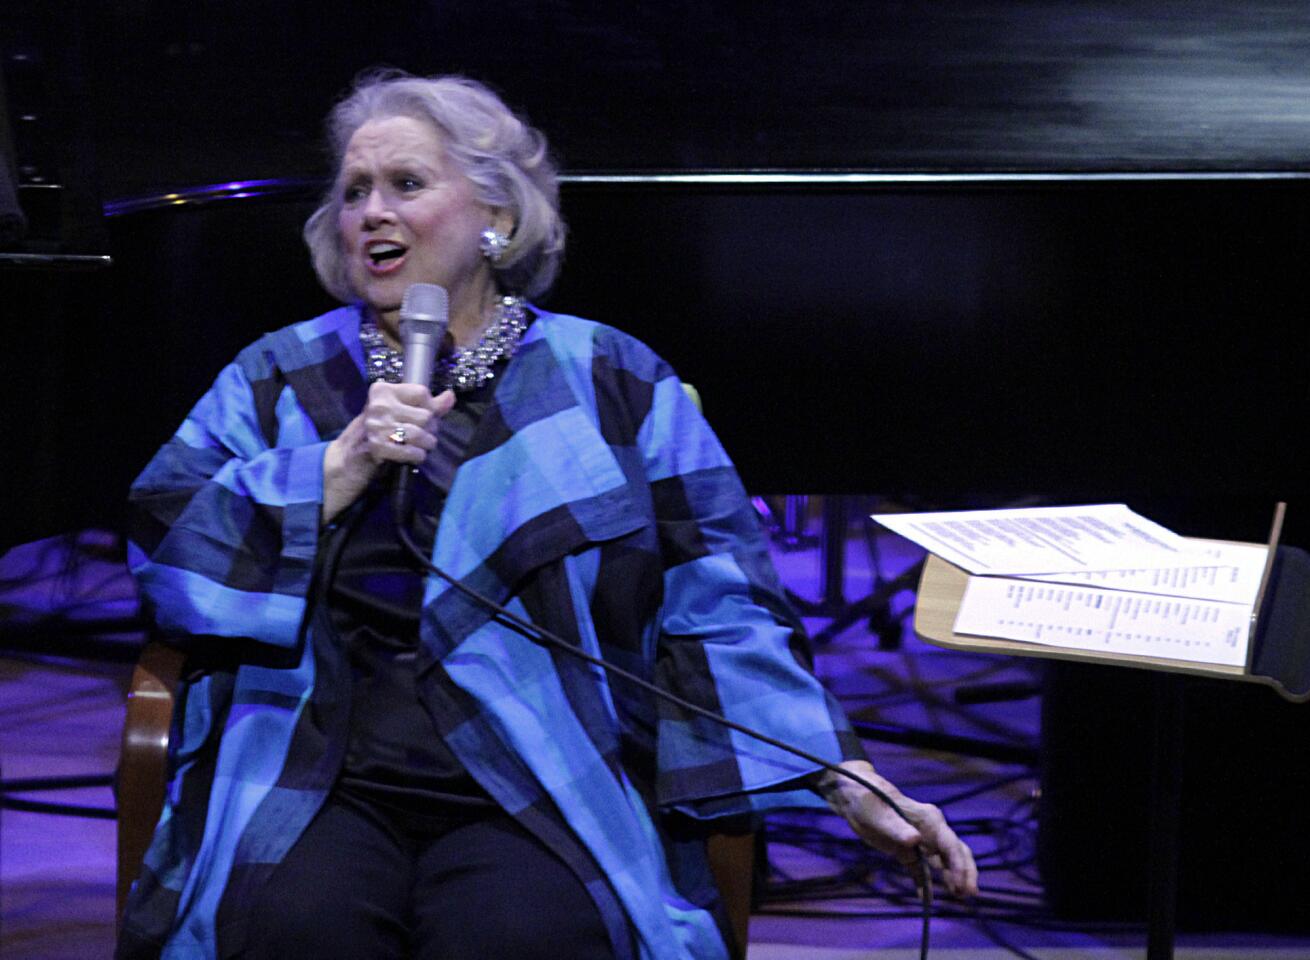 Arts and culture in pictures by The Times | Barbara Cook with the L.A. Phil